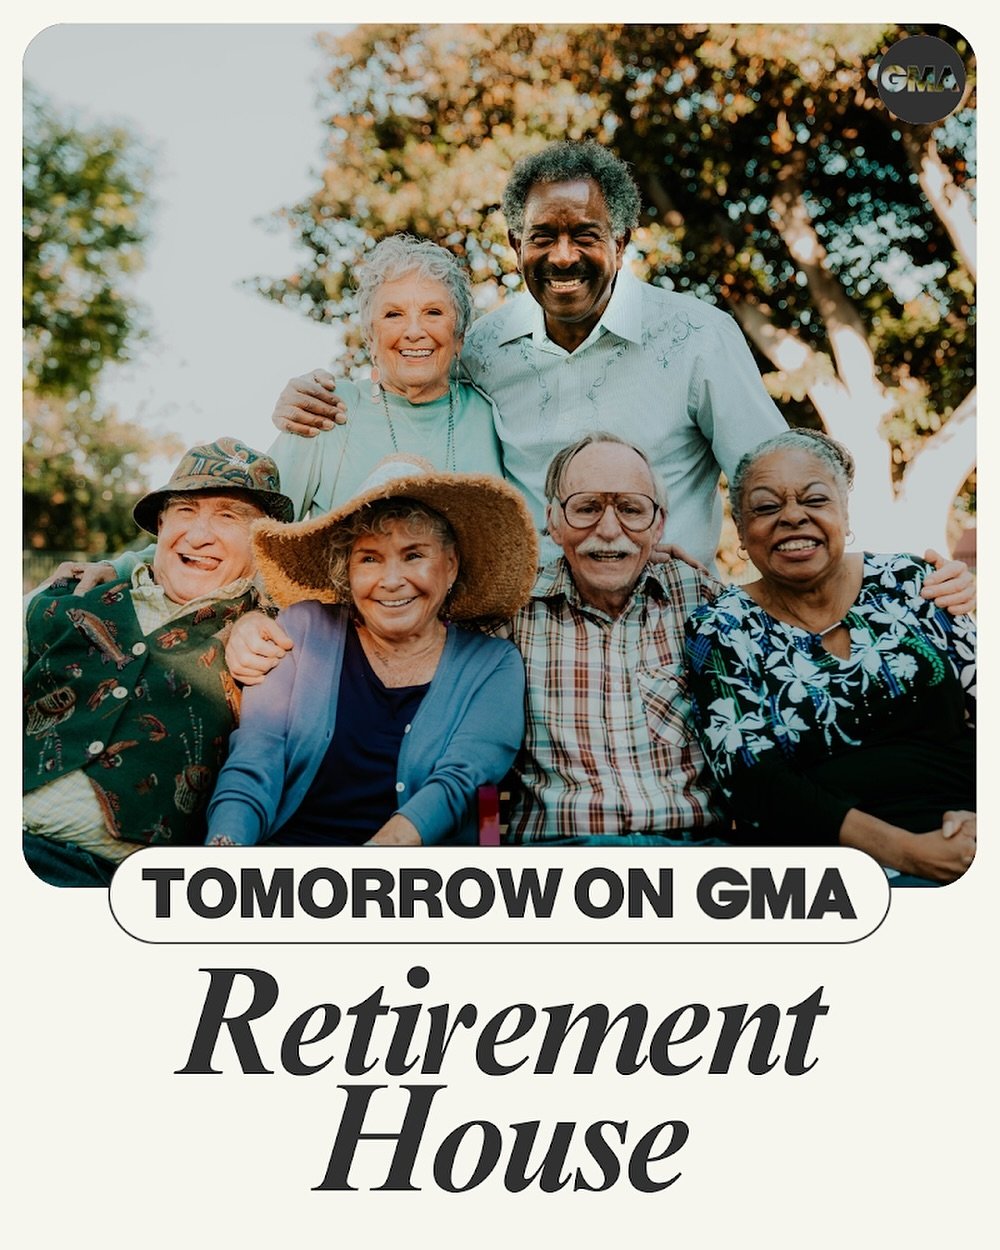 Check out the Retirement House on Good Morning America tomorrow at 8:30AM EST.